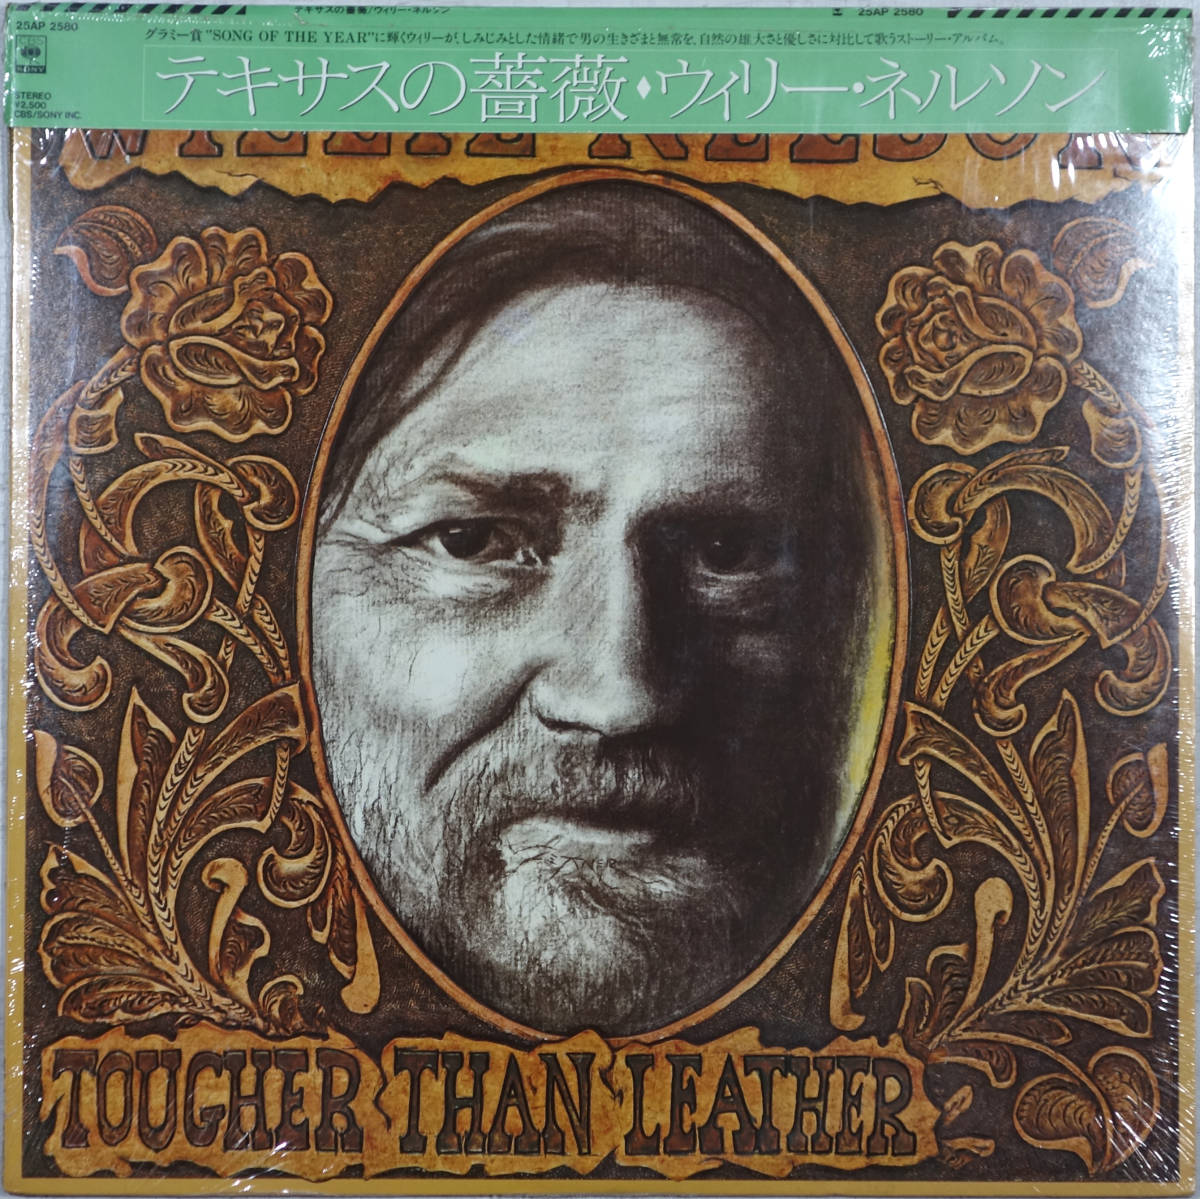 ◆WILLIE NELSON/TOUGHER THAN LEATHER (JPN LP Promo/Sealed)_画像1